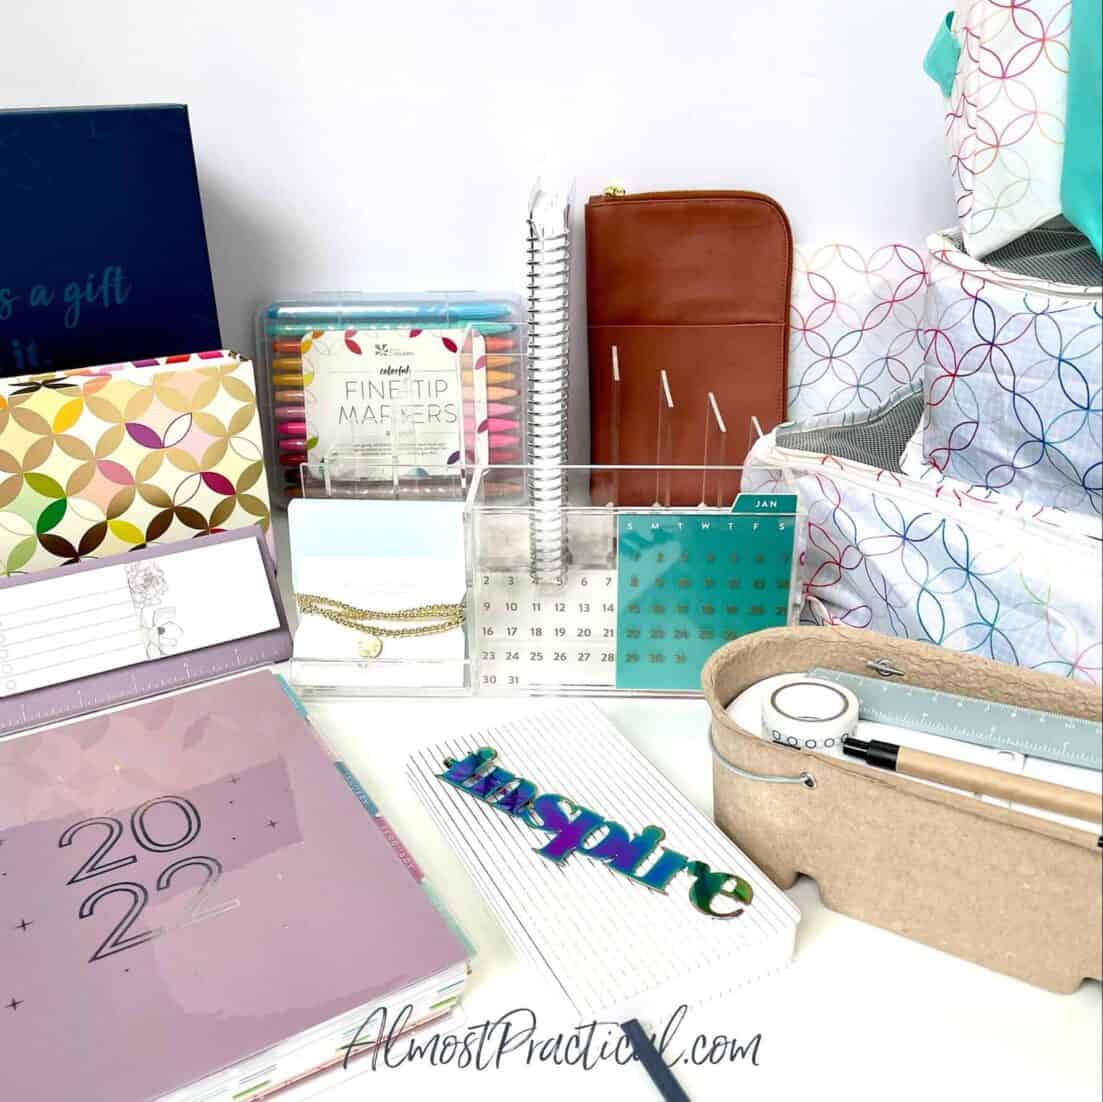 Collection of Erin Condren items from the 2021 Holiday Collection.